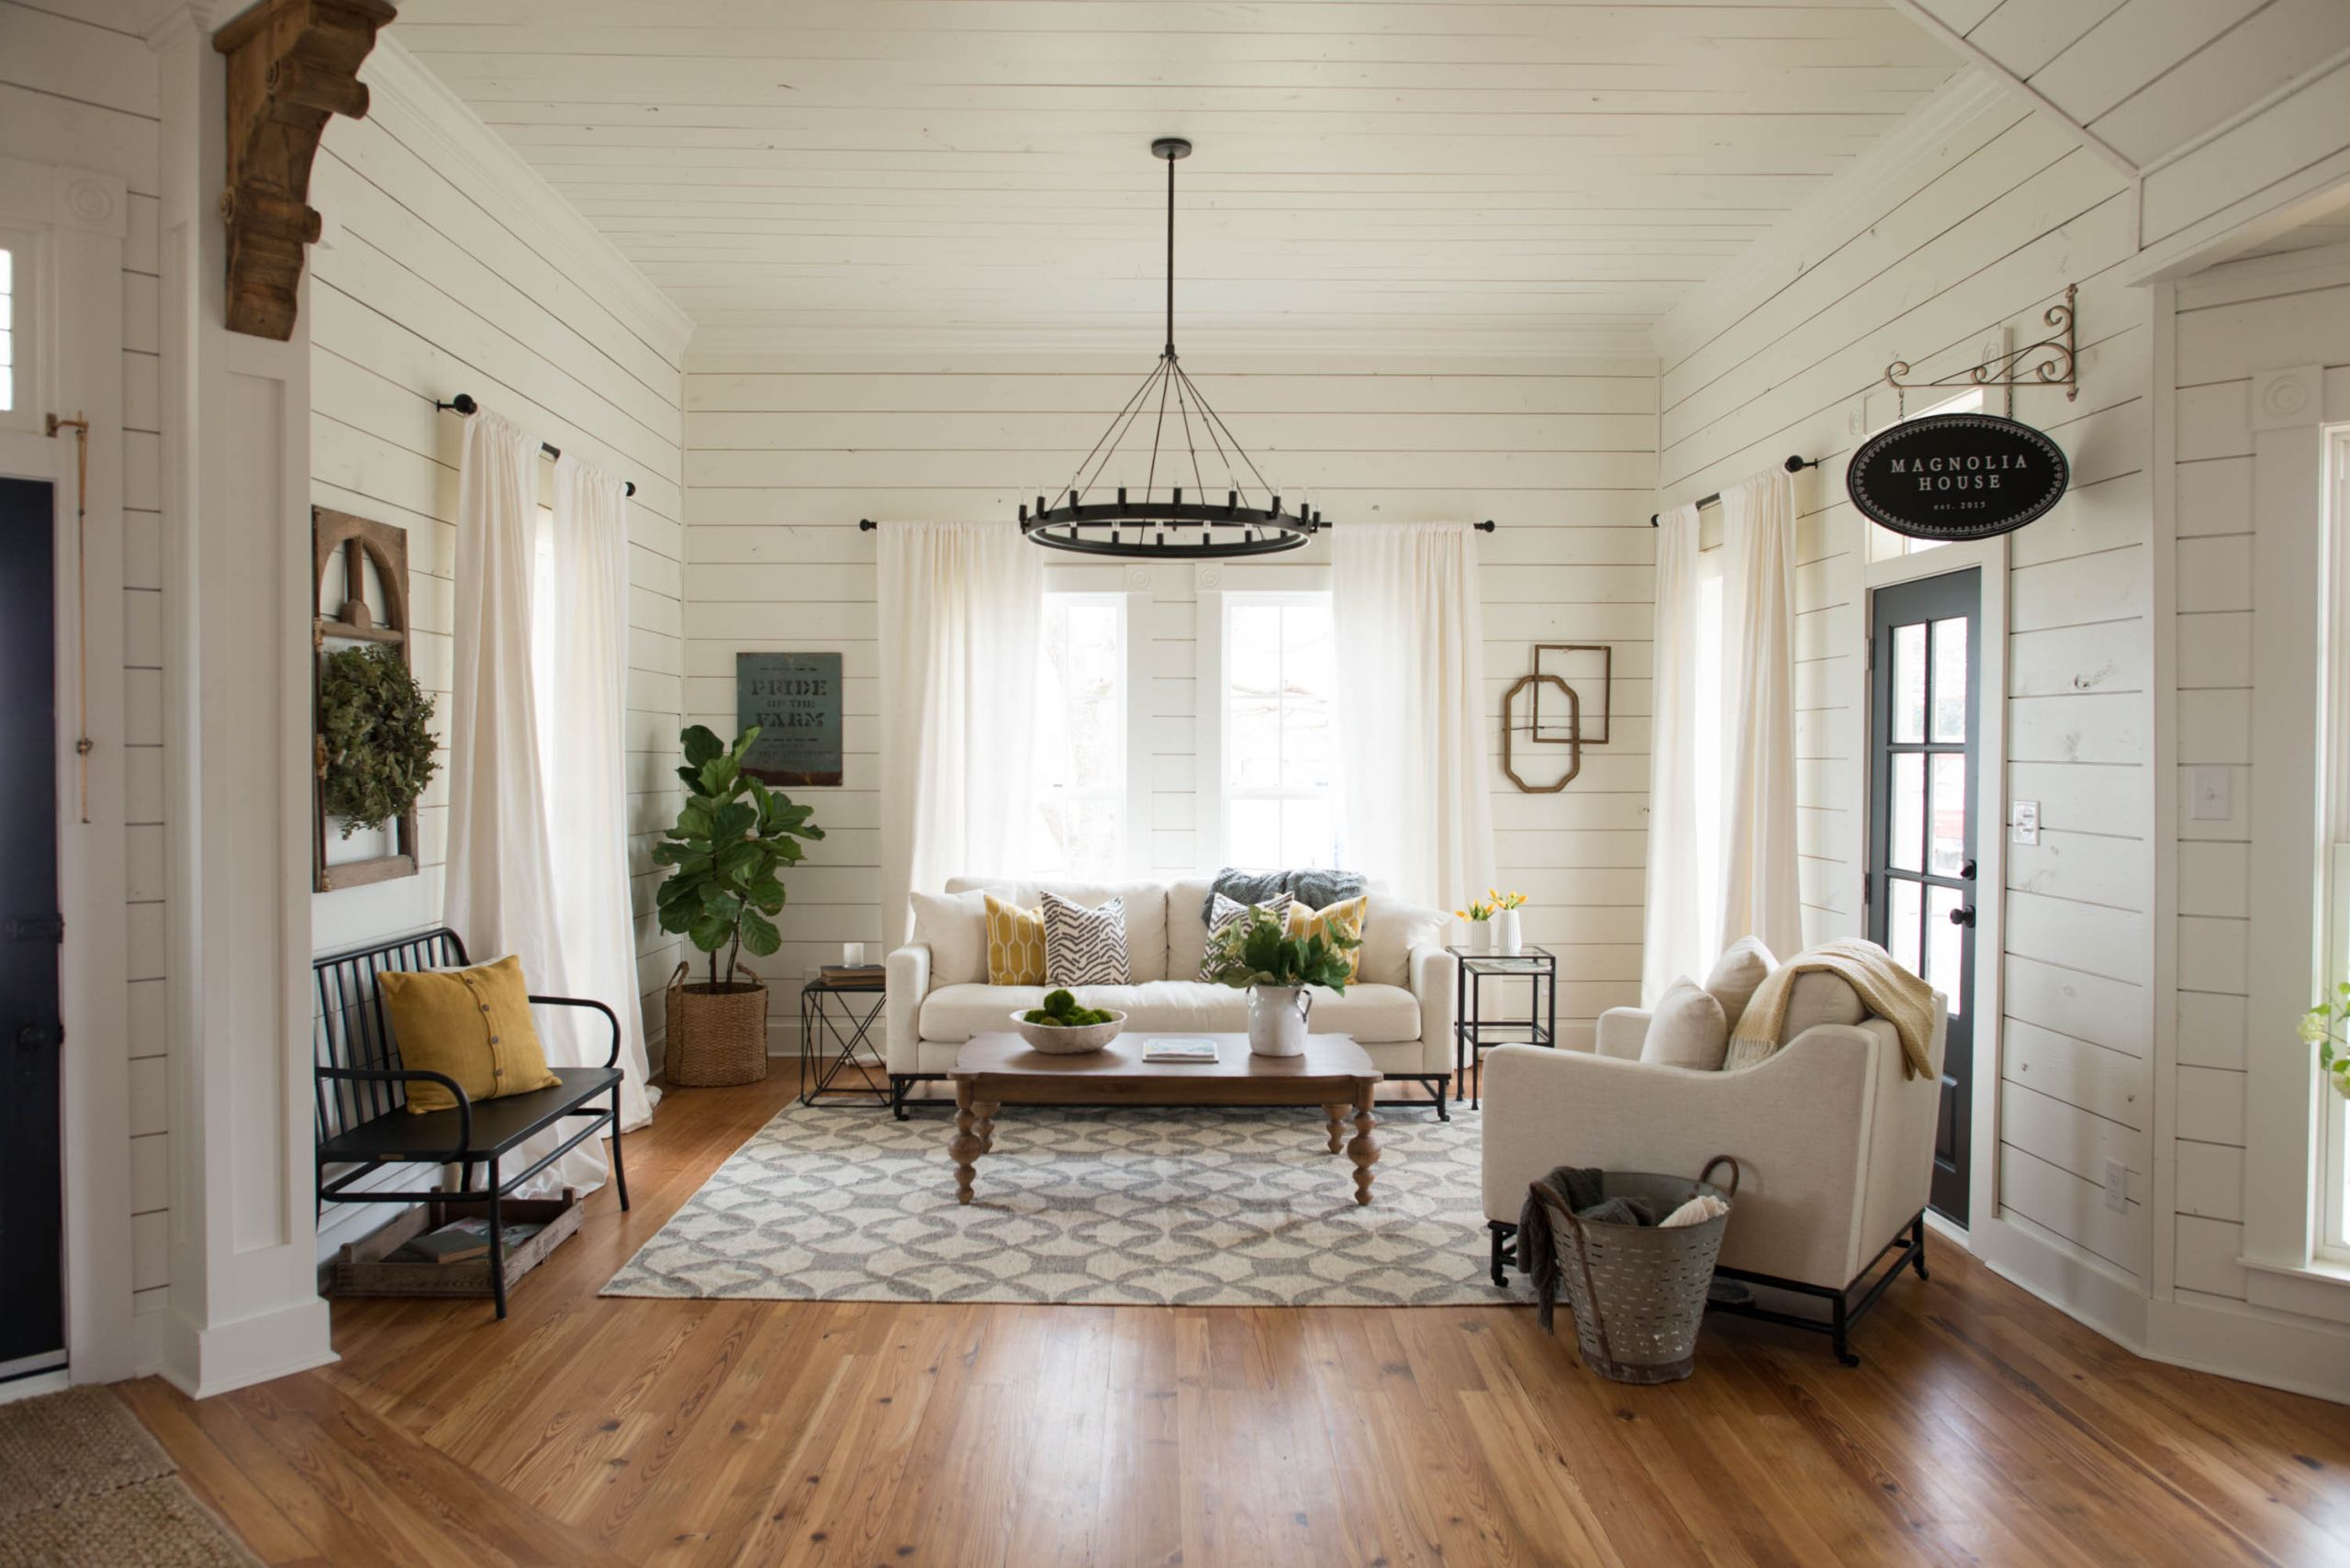 Joanna Gaines Living Room Ideas
 Magnolia House is Opening Up 2017 Reservations Next Week